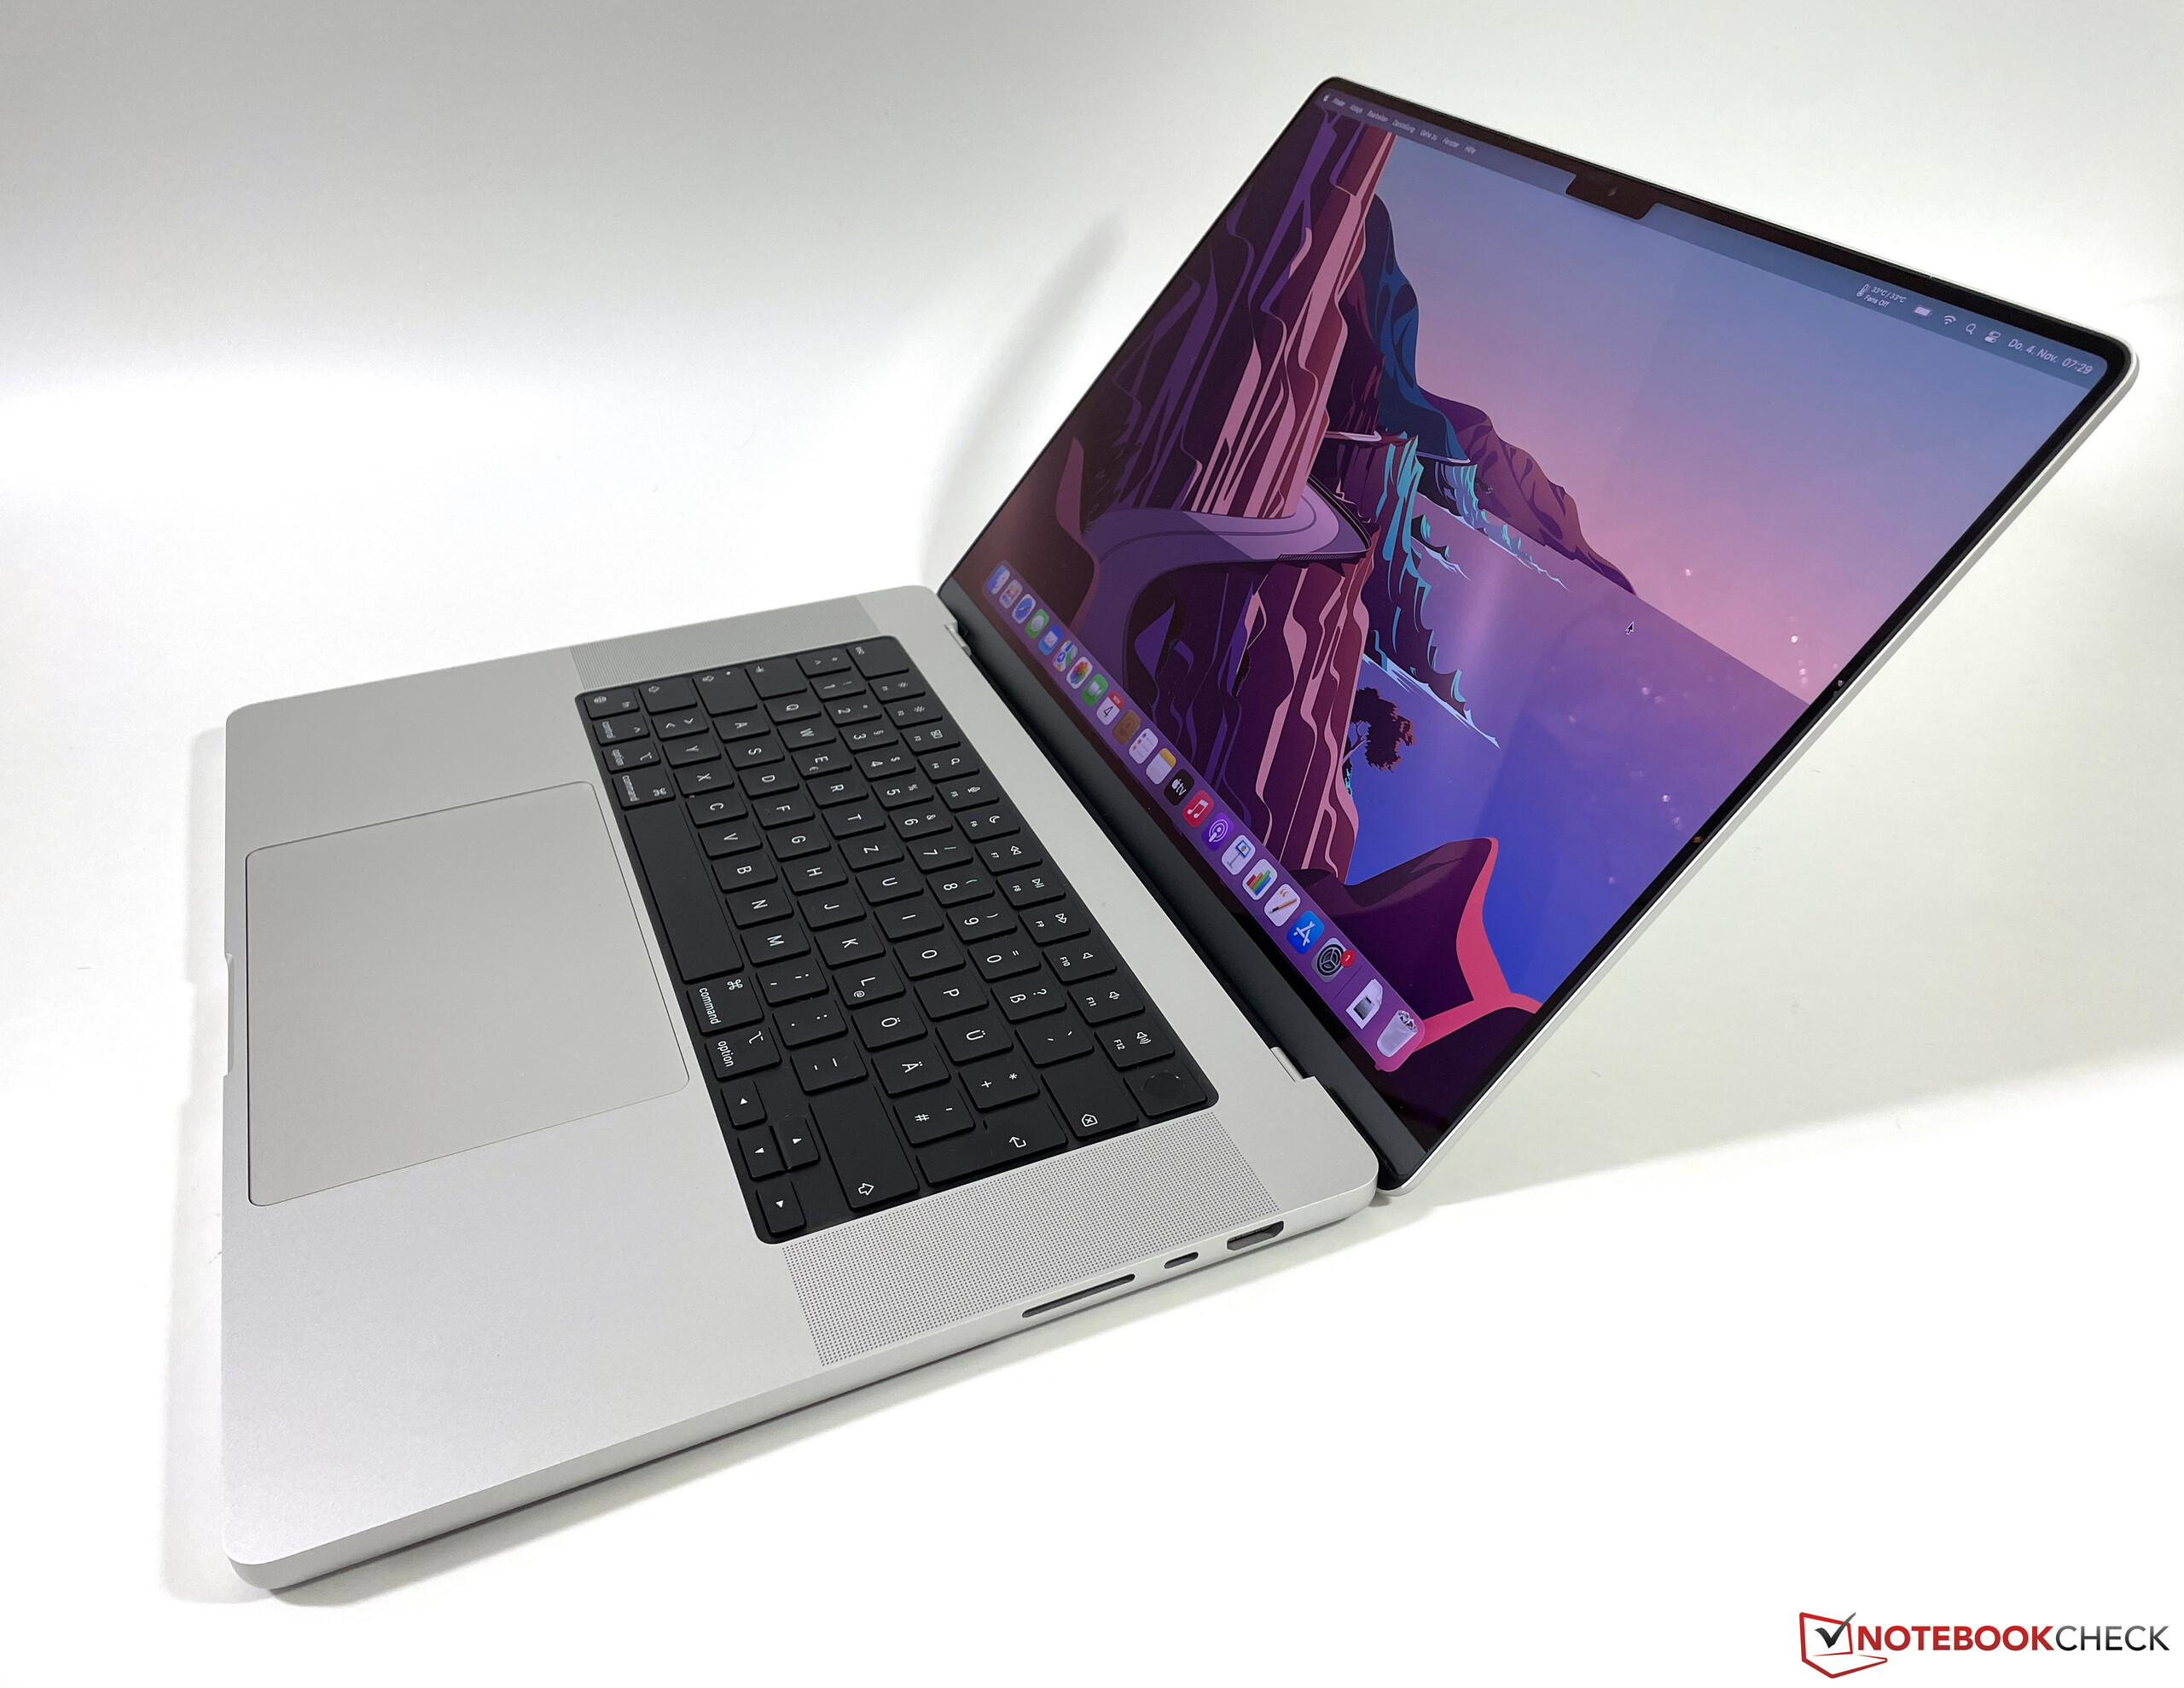 MacBook Pro M1 Max Review: Great for gaming (when things fall into place)